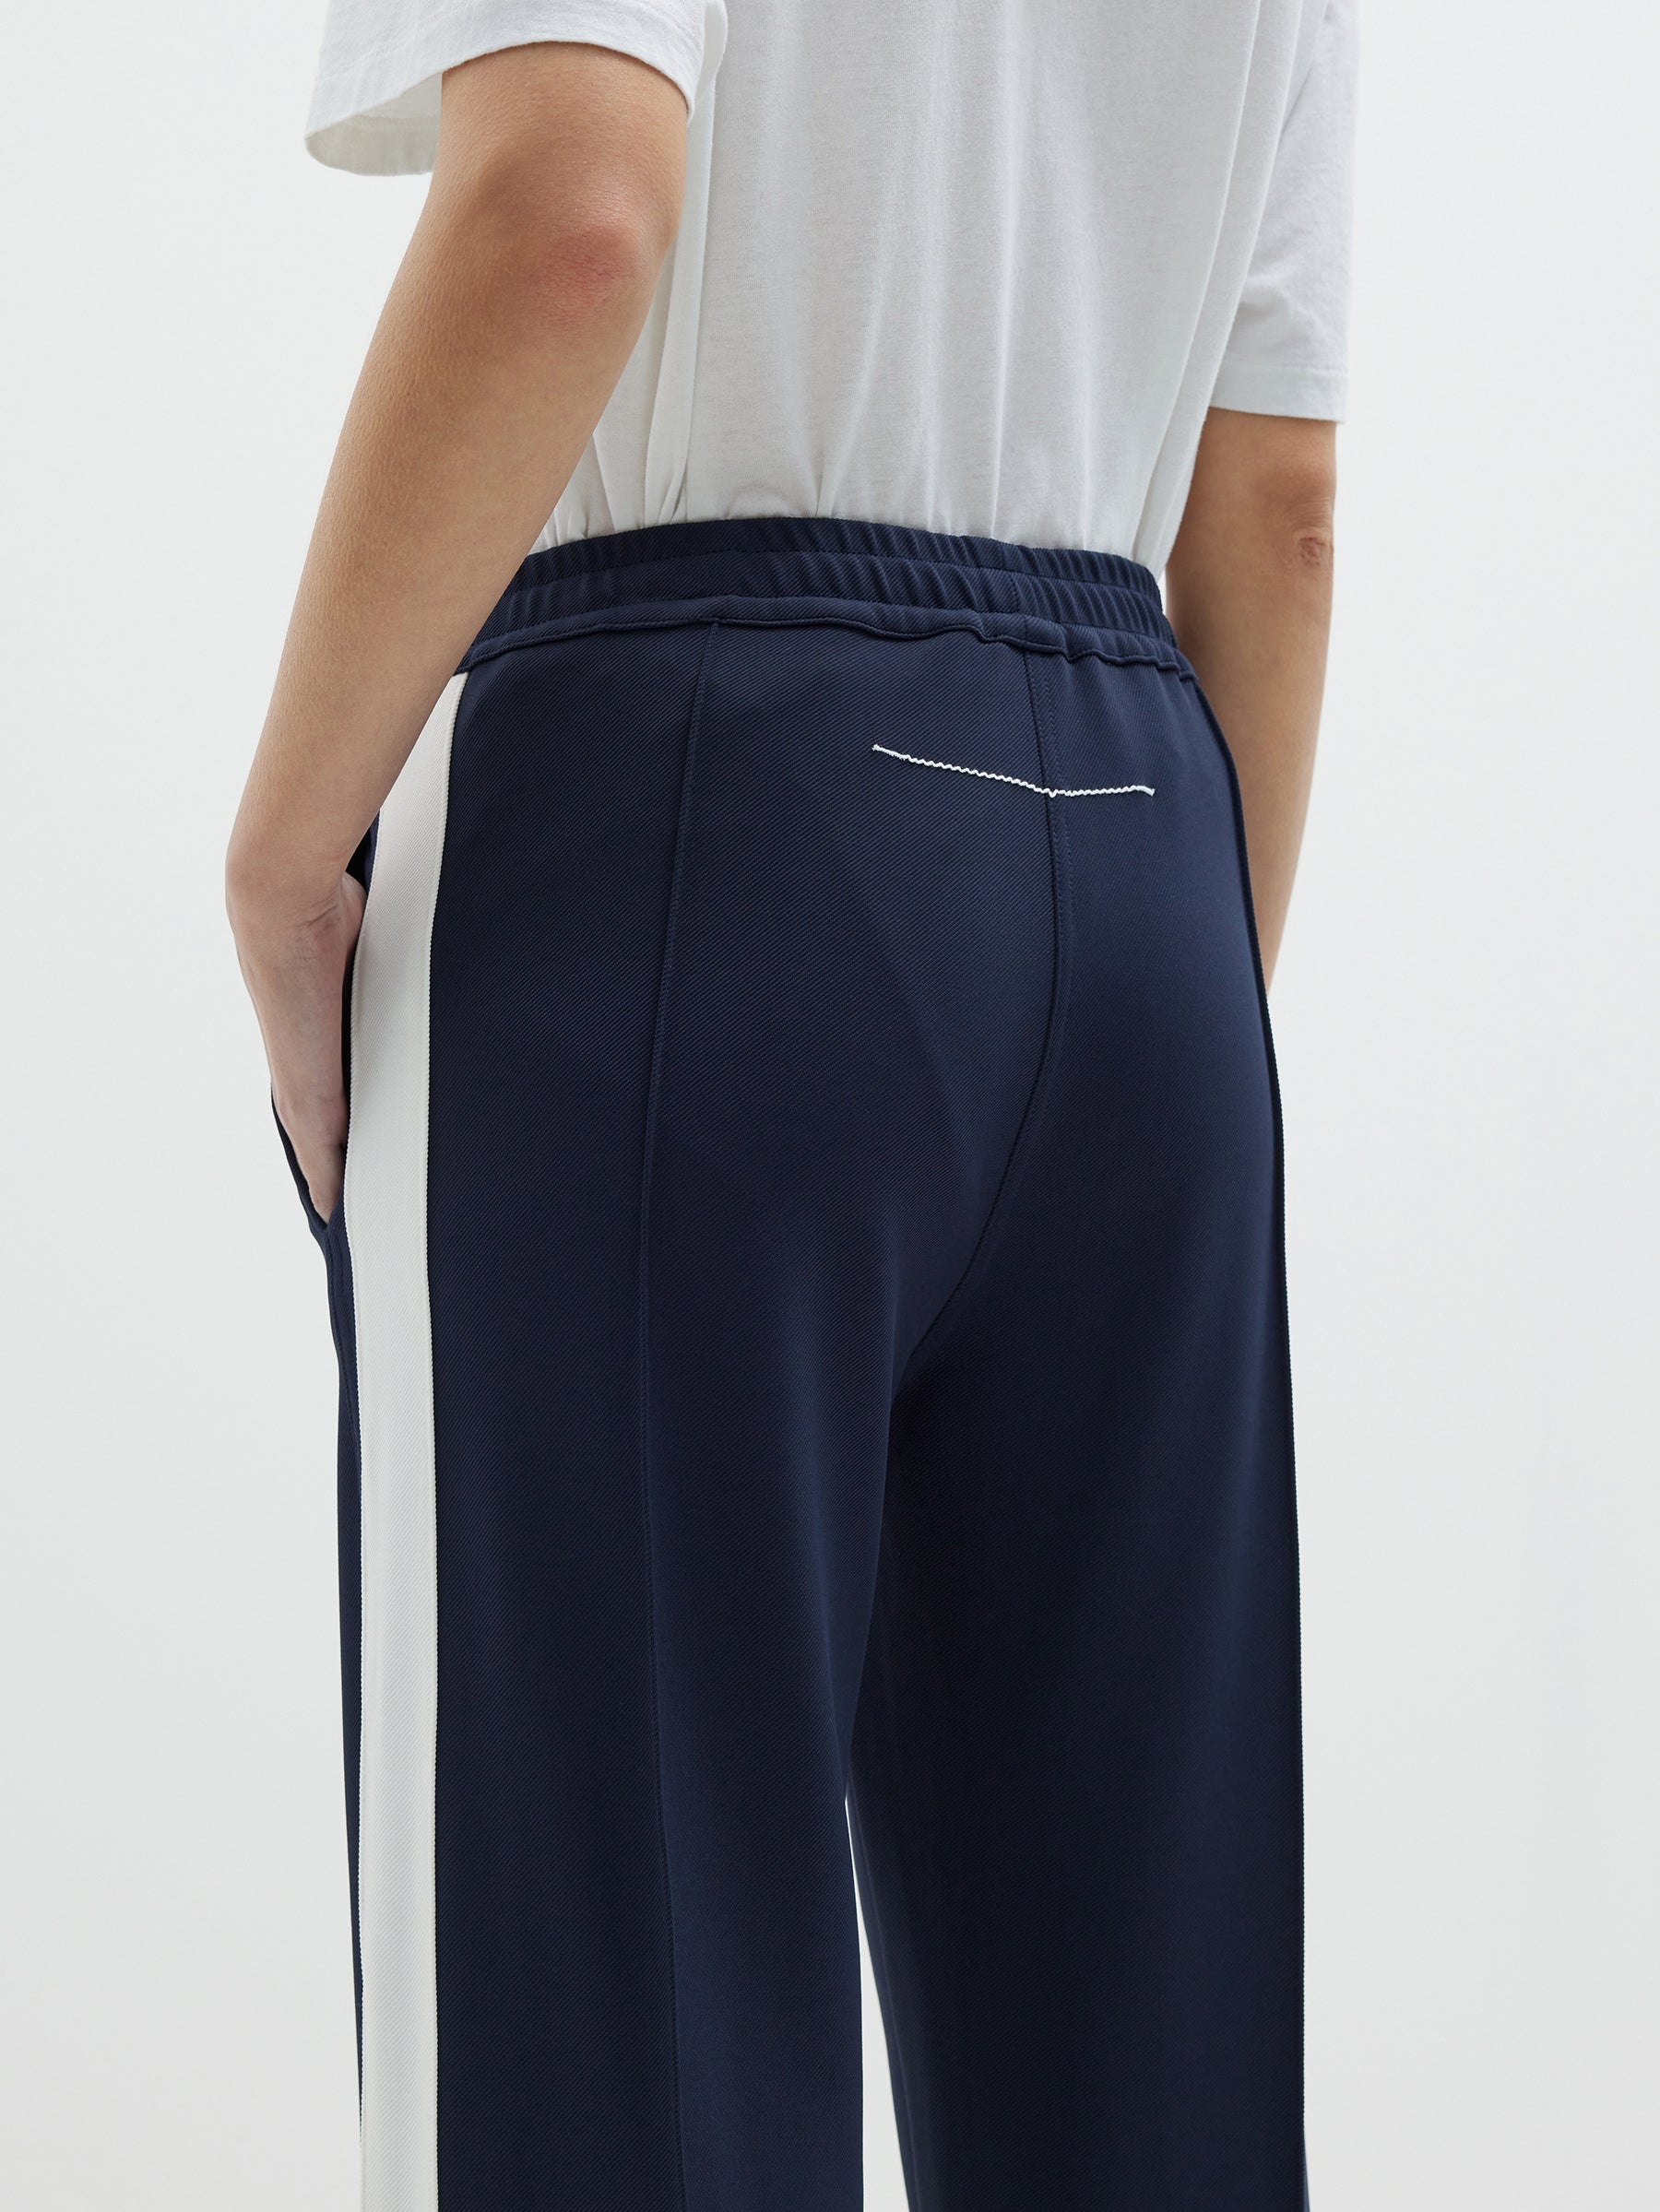 Bassike | Twill Stripe Detail Pant - Ink/White